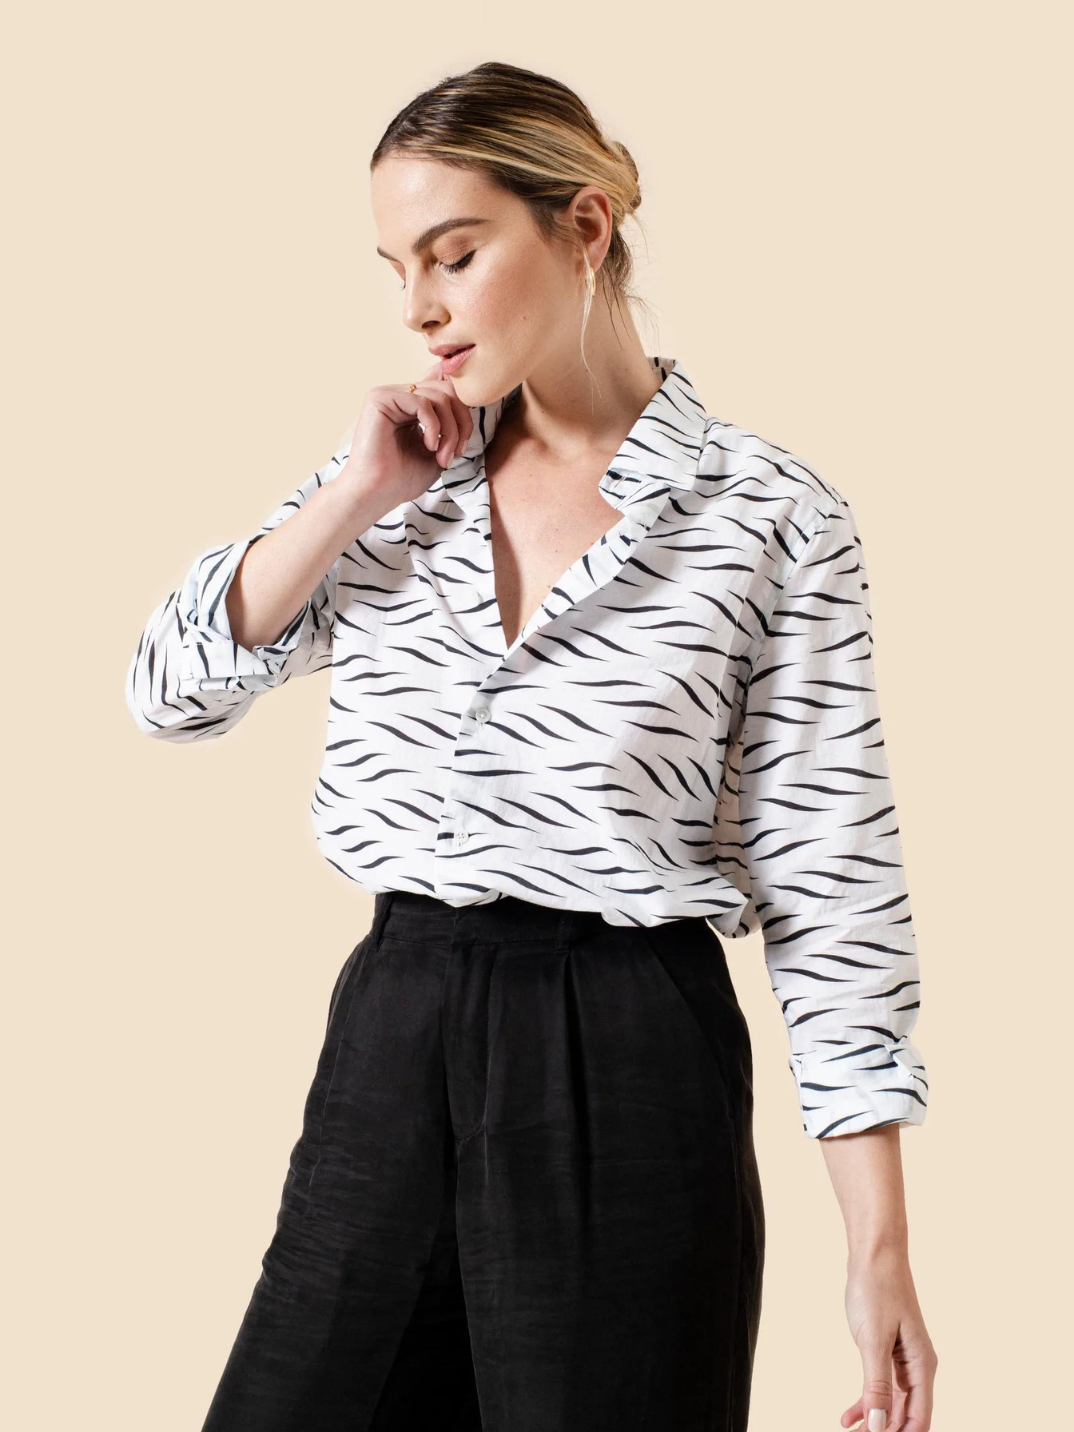 Every capsule wardrobe needs a classic shirt – and you’ve found it with The Avery Button Down. Made from 100% organic cotton, The Avery combines comfort with a polished finish. Tie with a front knot for a more relaxed weekend vibe, or tuck in for an instantly elevated work look. shop sustainable fashion women's clothing